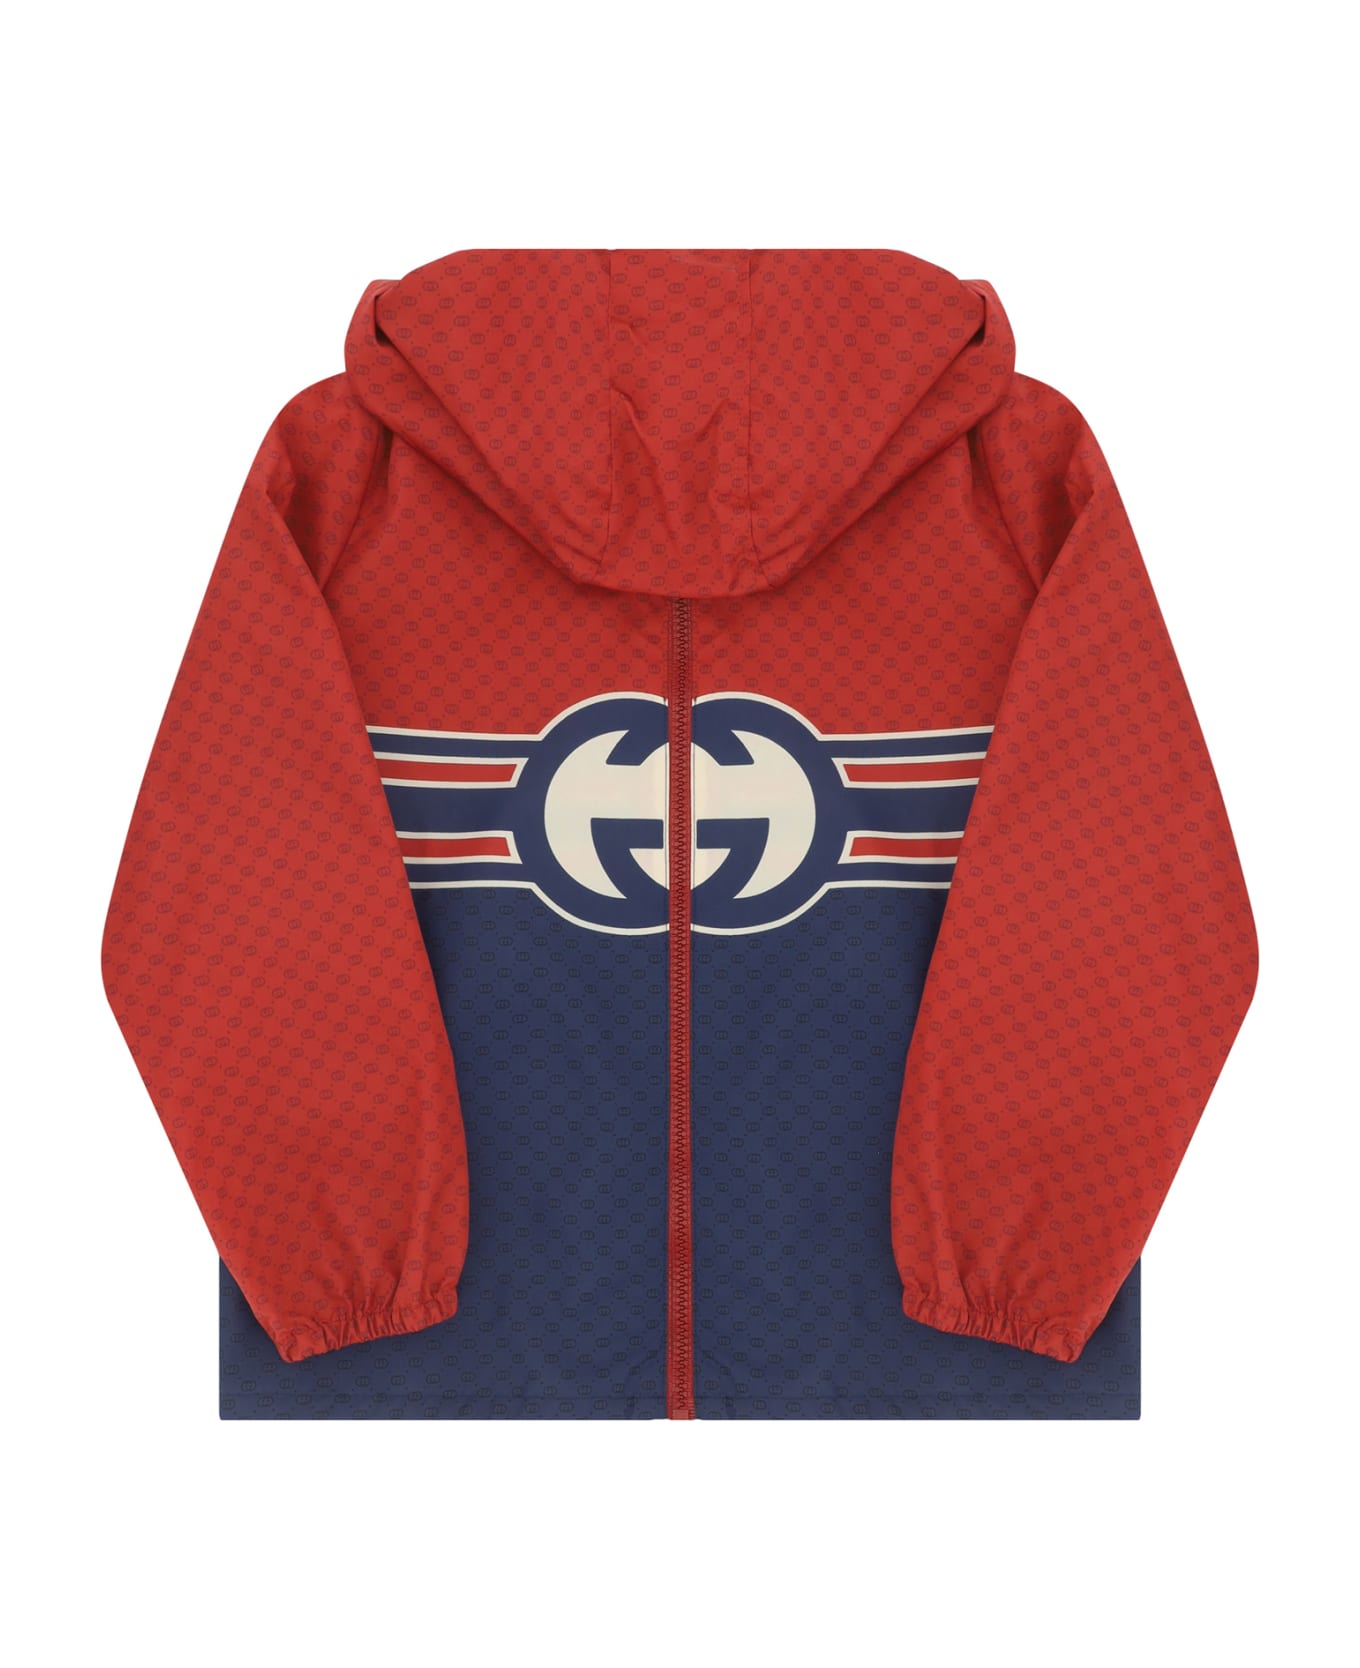 Gucci Jacket For Boy - Blue/red